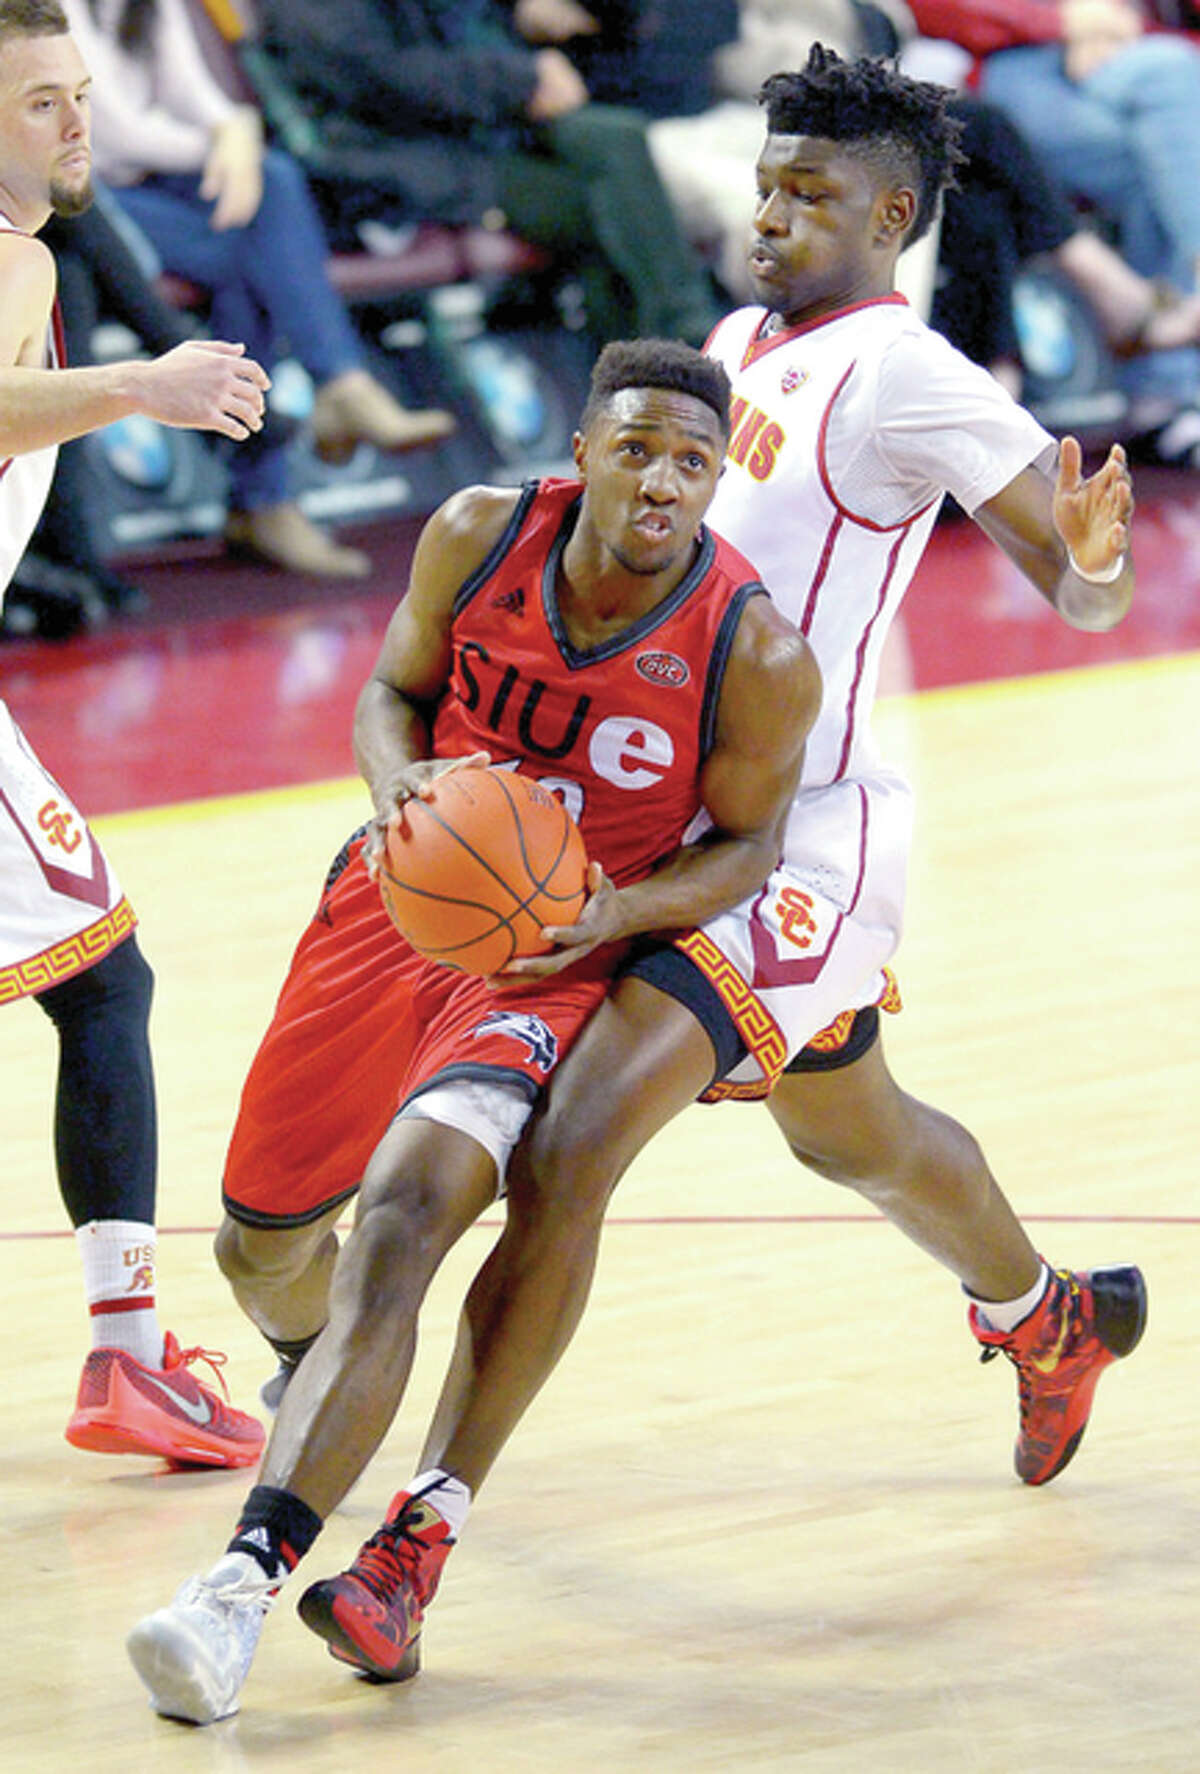 SIUE’s Carlos Anderson (10), a freshman from Alton, drives past USC’s Chimezie Metu (4) Monday night in Los Angeles.